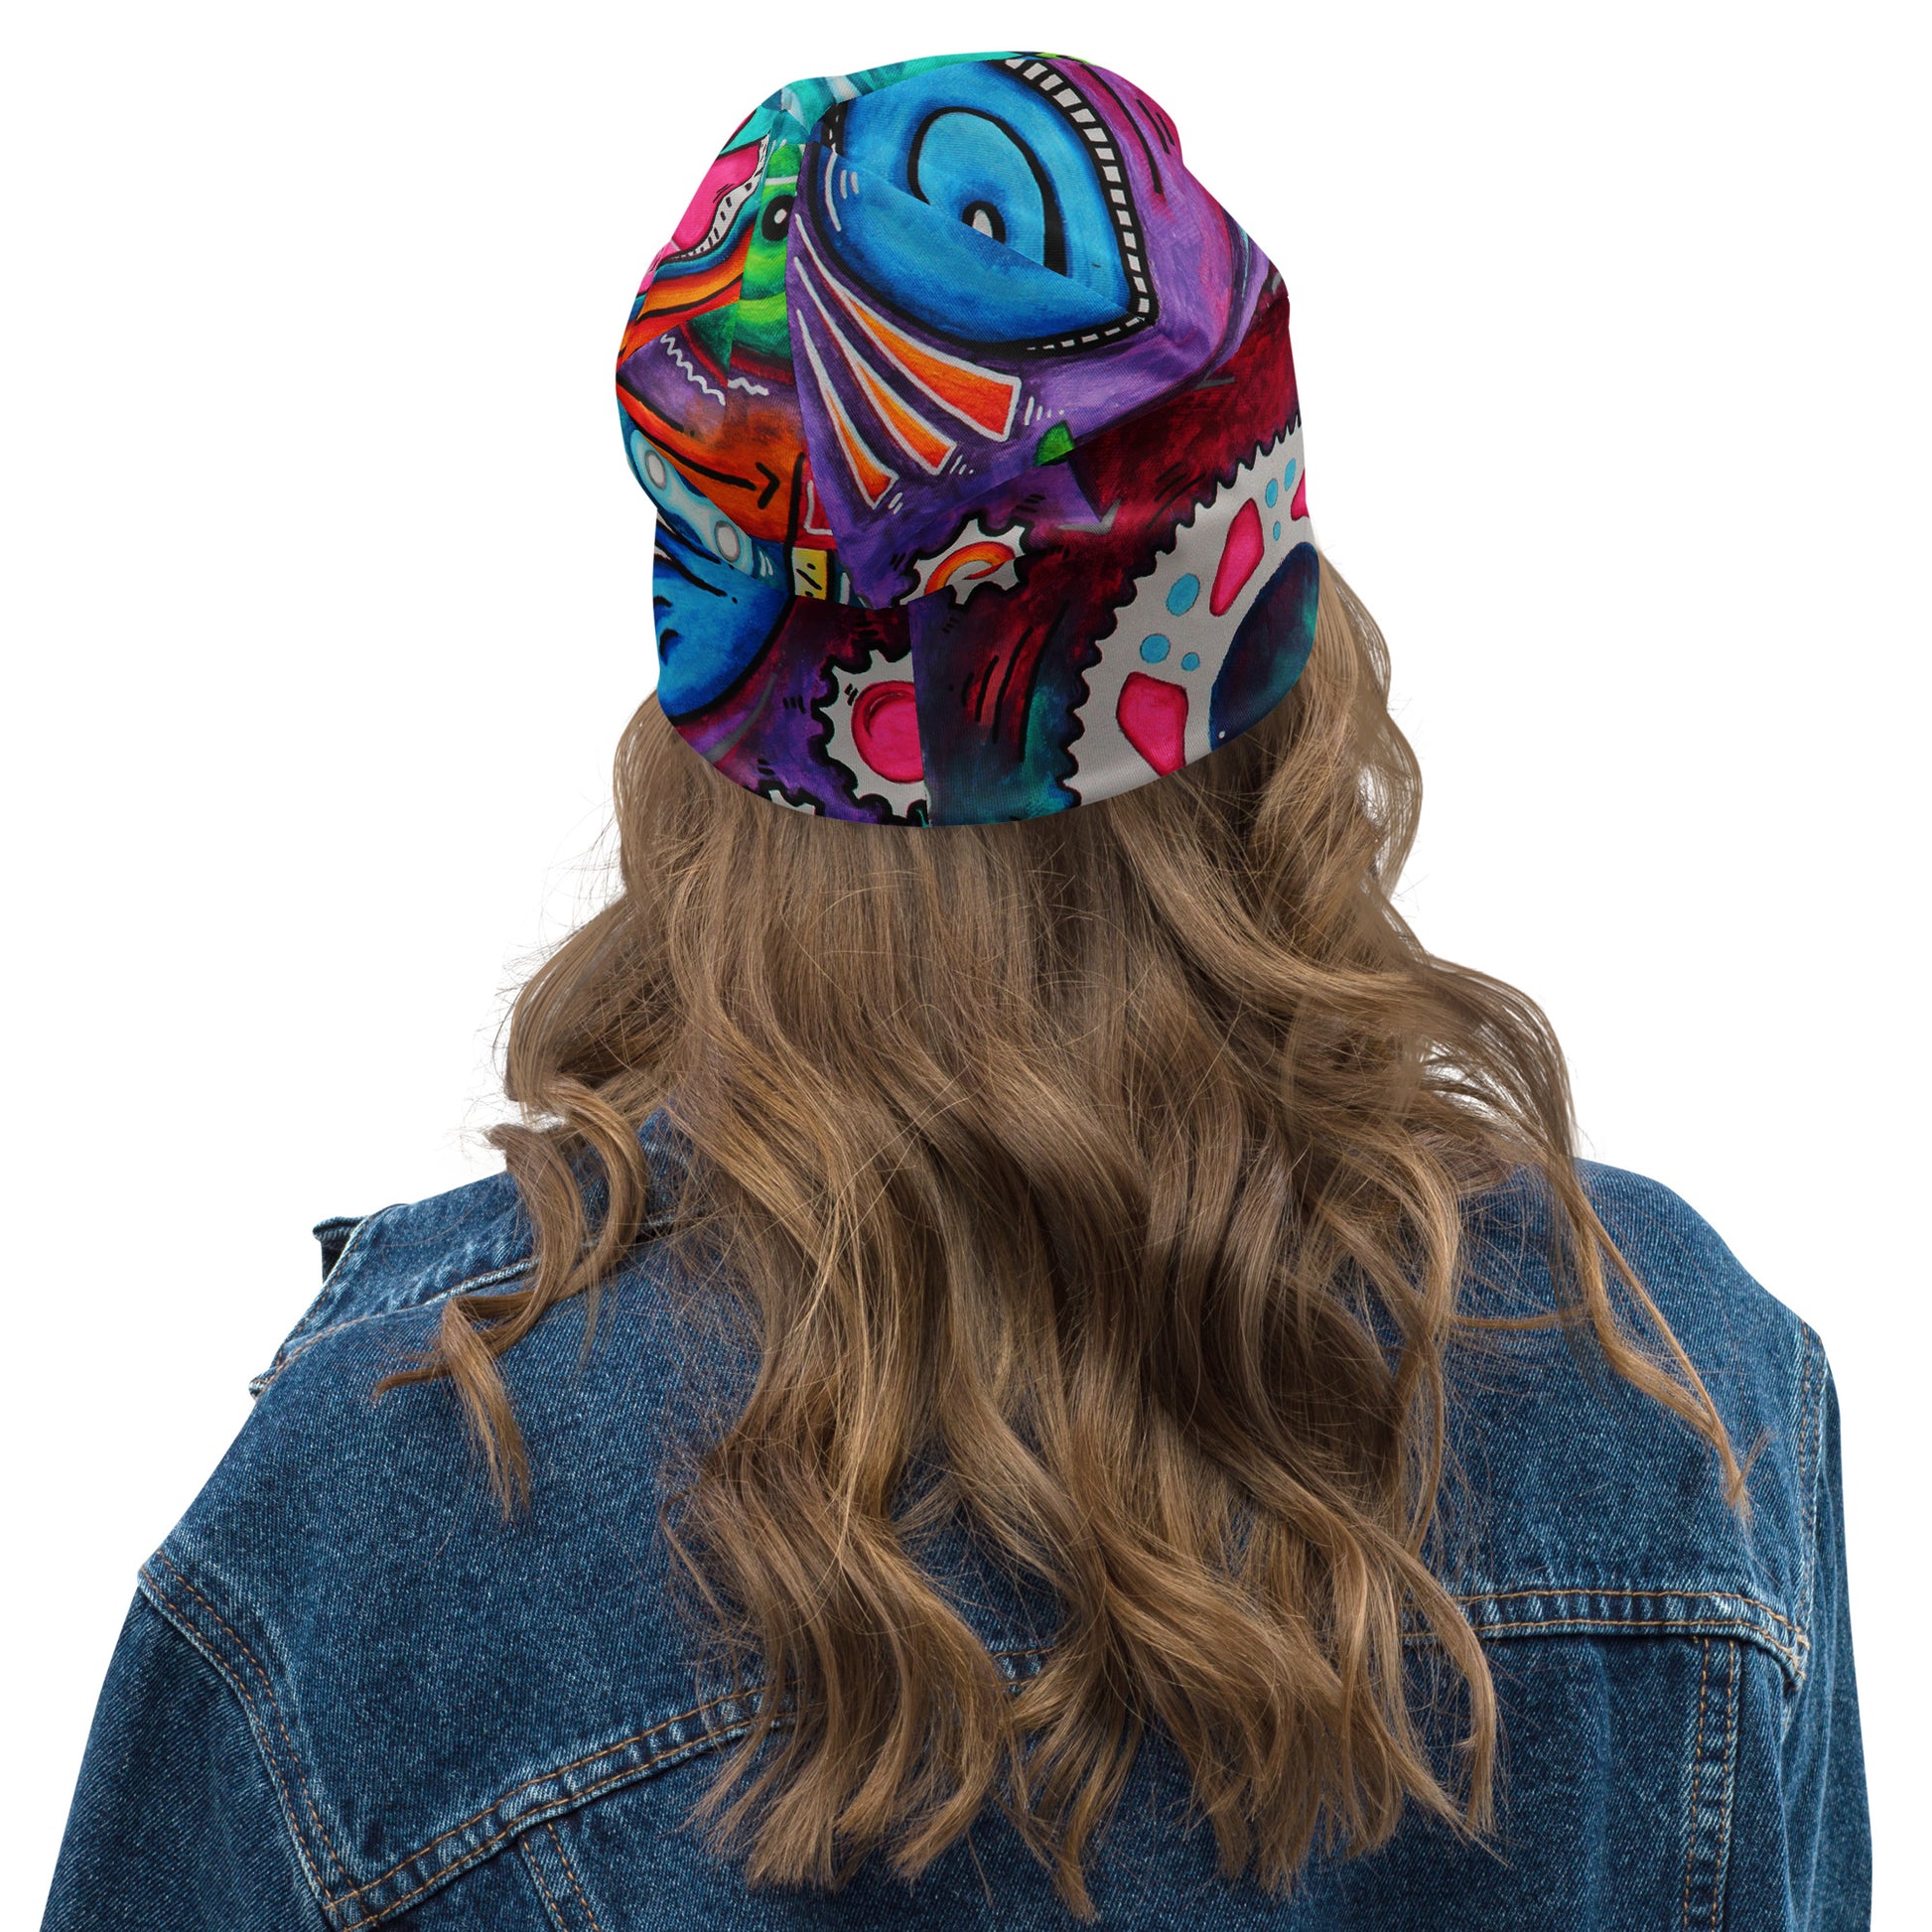 colorful and fun cycling biking beanie in bold pink purple rainbow colors. featuring gears and chains, perfect for the avid cycling enthusiasts for chilly rides, or to wear on a hike or anytime you would wear a beanie and want something fun and stylish! From the chic, modern cycling brand AROON